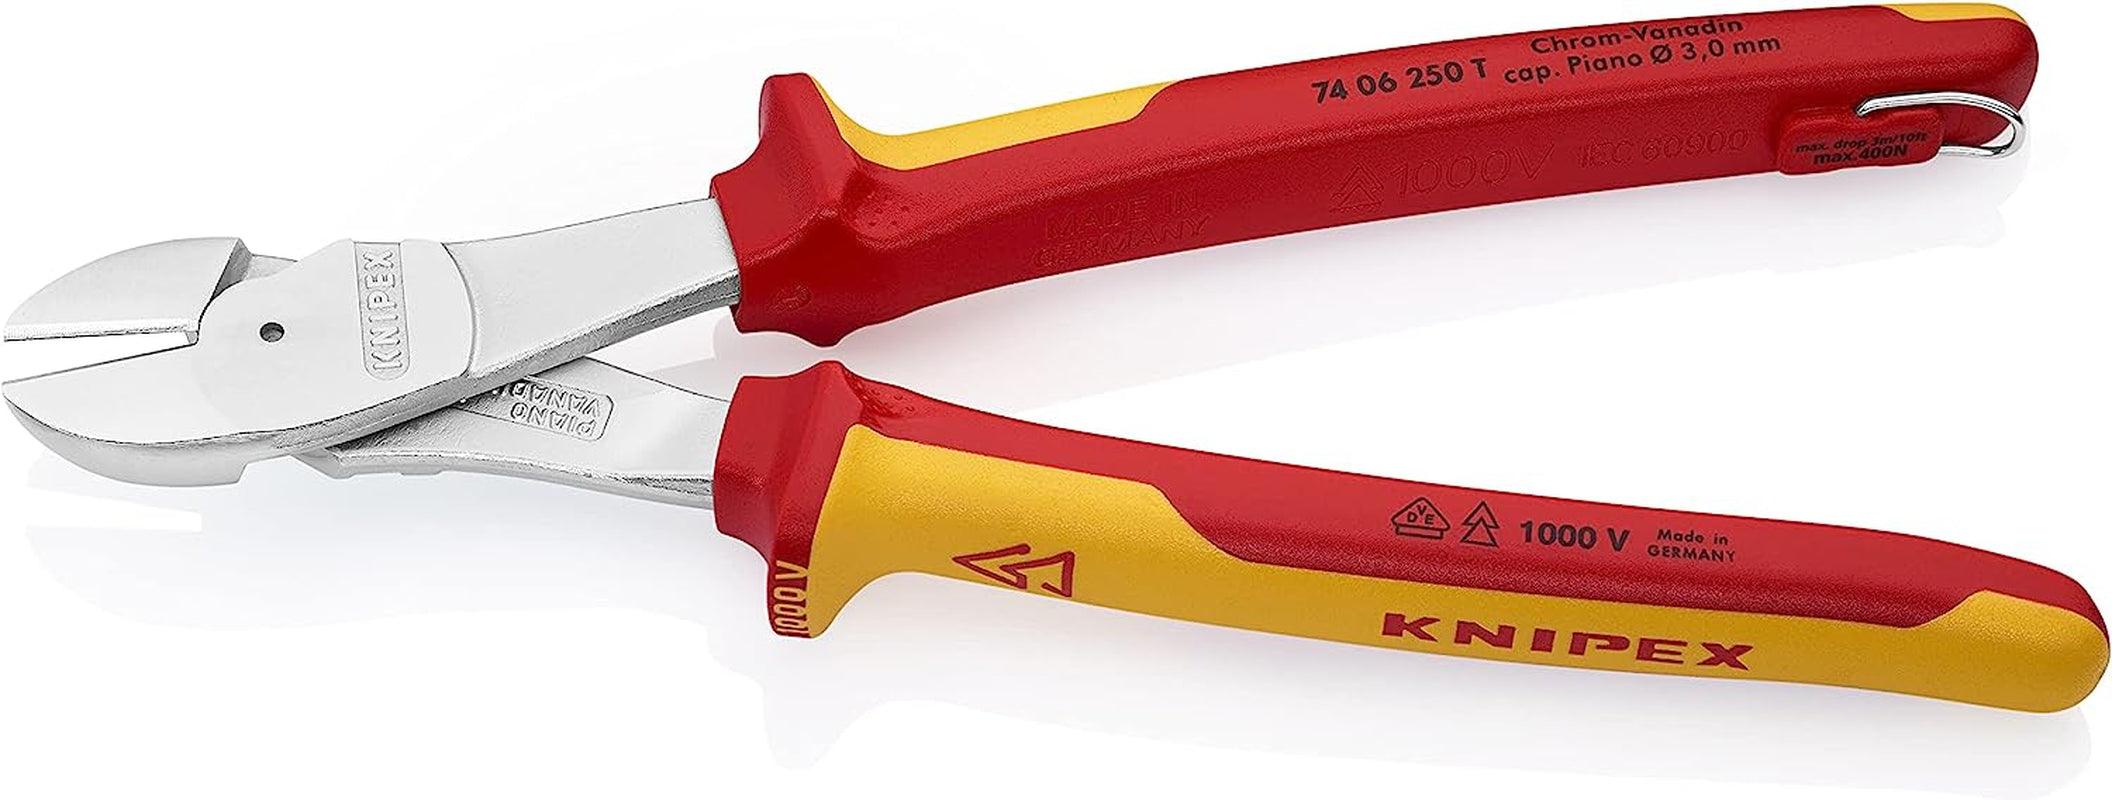 10" High Leverage Diagonal Cutters-1000V Insulated-Tethered Attachment - First Choice Electric